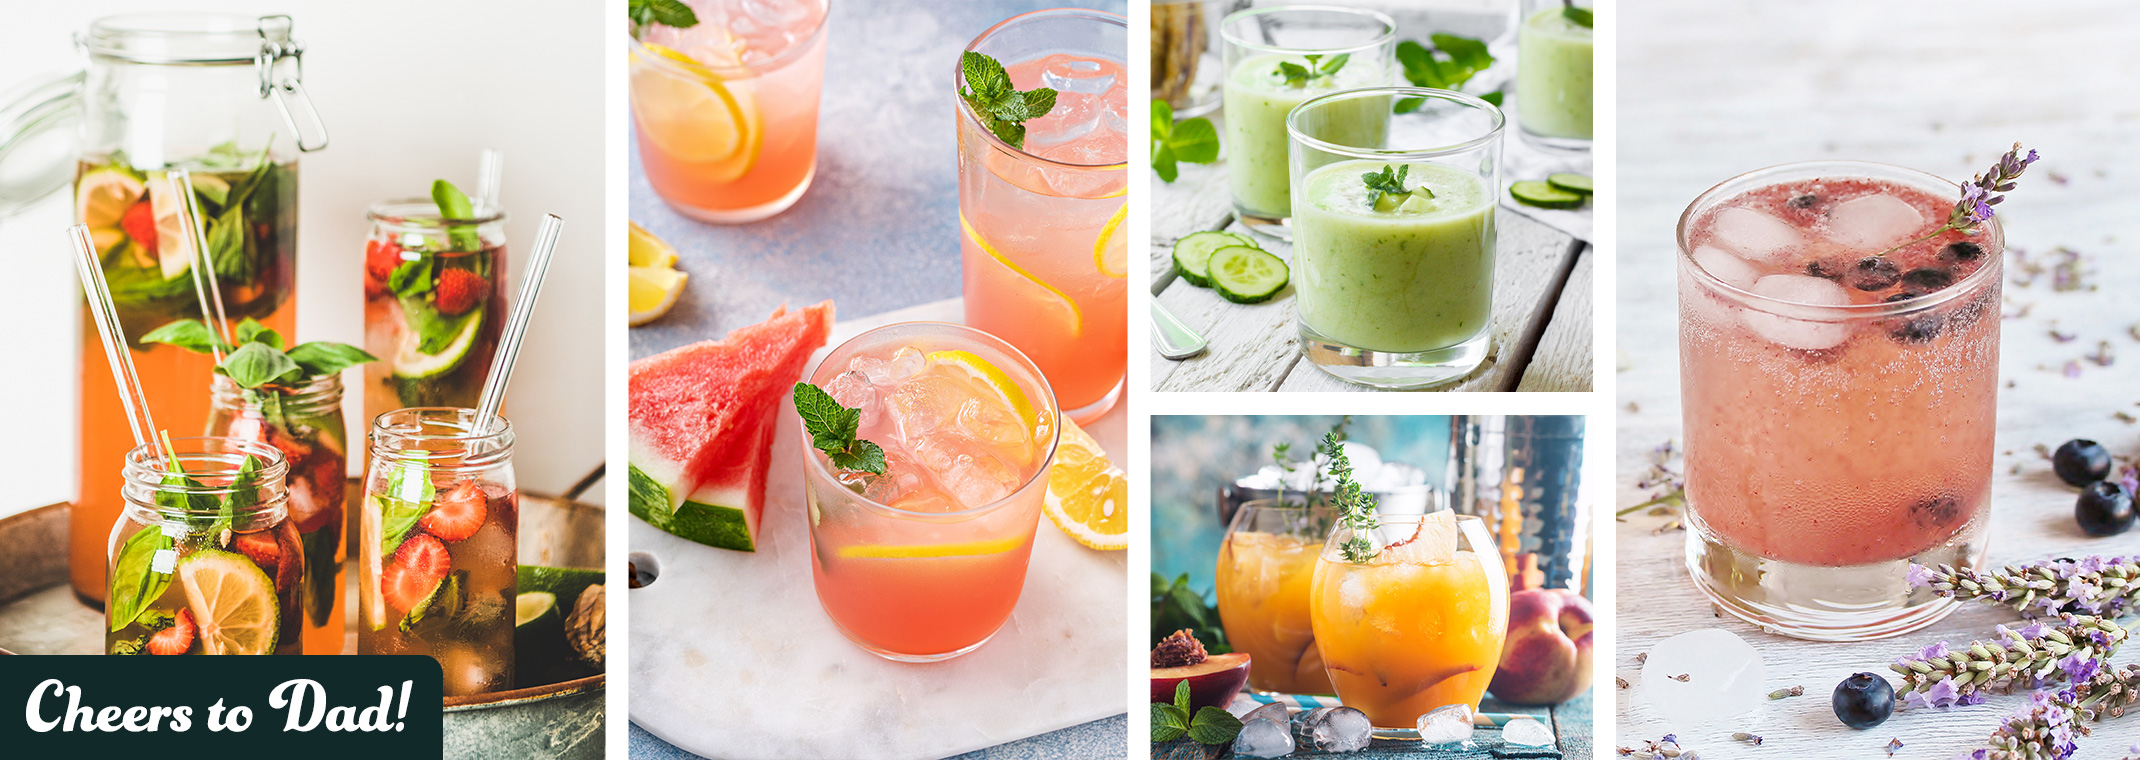 Cheers to Dad! and 5 different beverages made with fresh fruits and herbs.